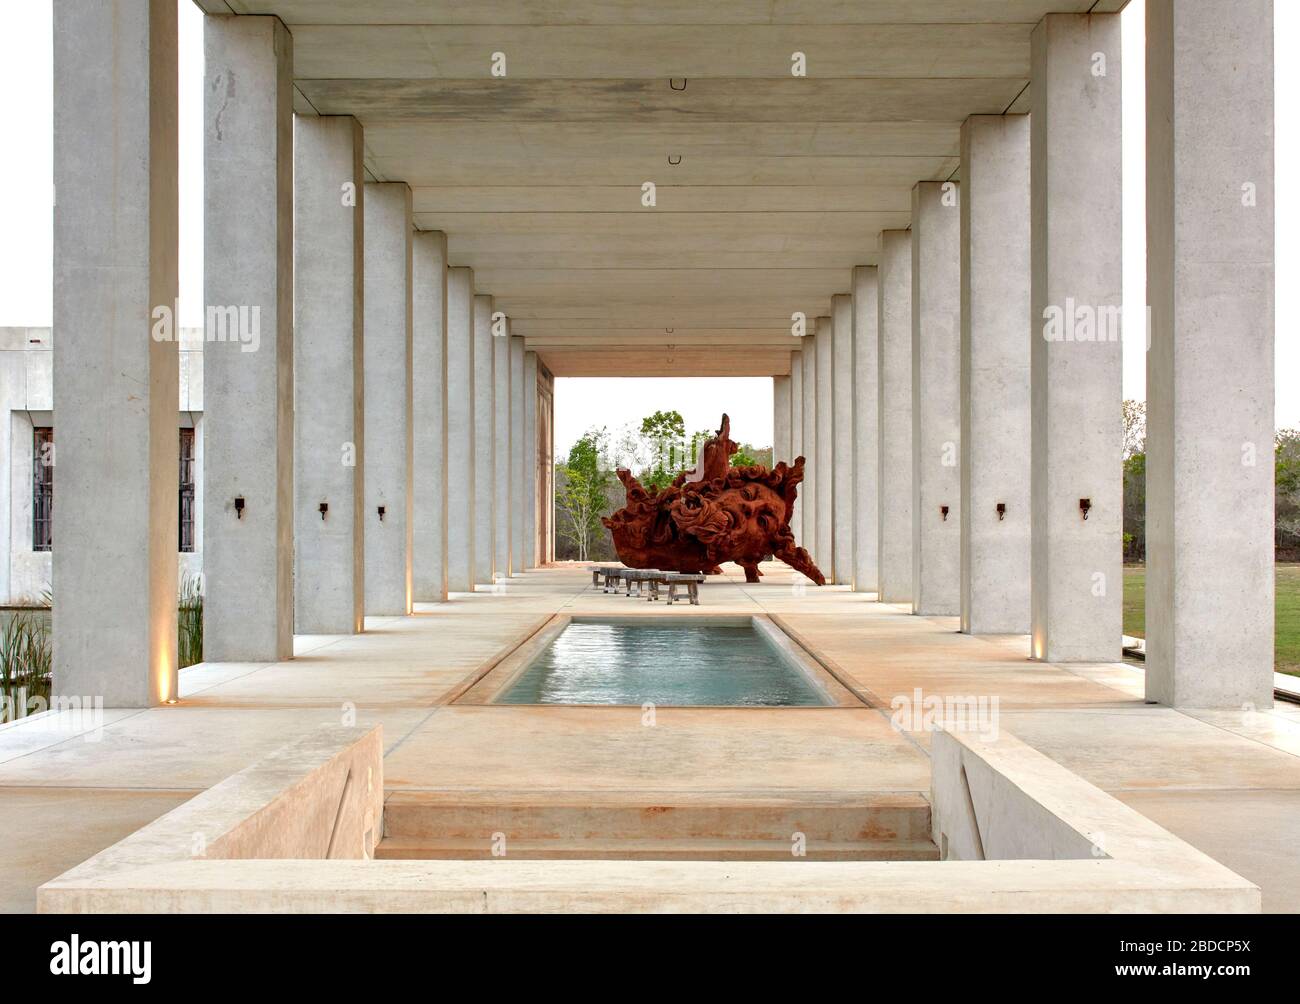 Colonnade with open air pool hall and  large sculpture beyond. Plantel Matilde, Yucatan, Mexico. Architect: Javier Marín and Arcadio Marín, 2020. Stock Photo